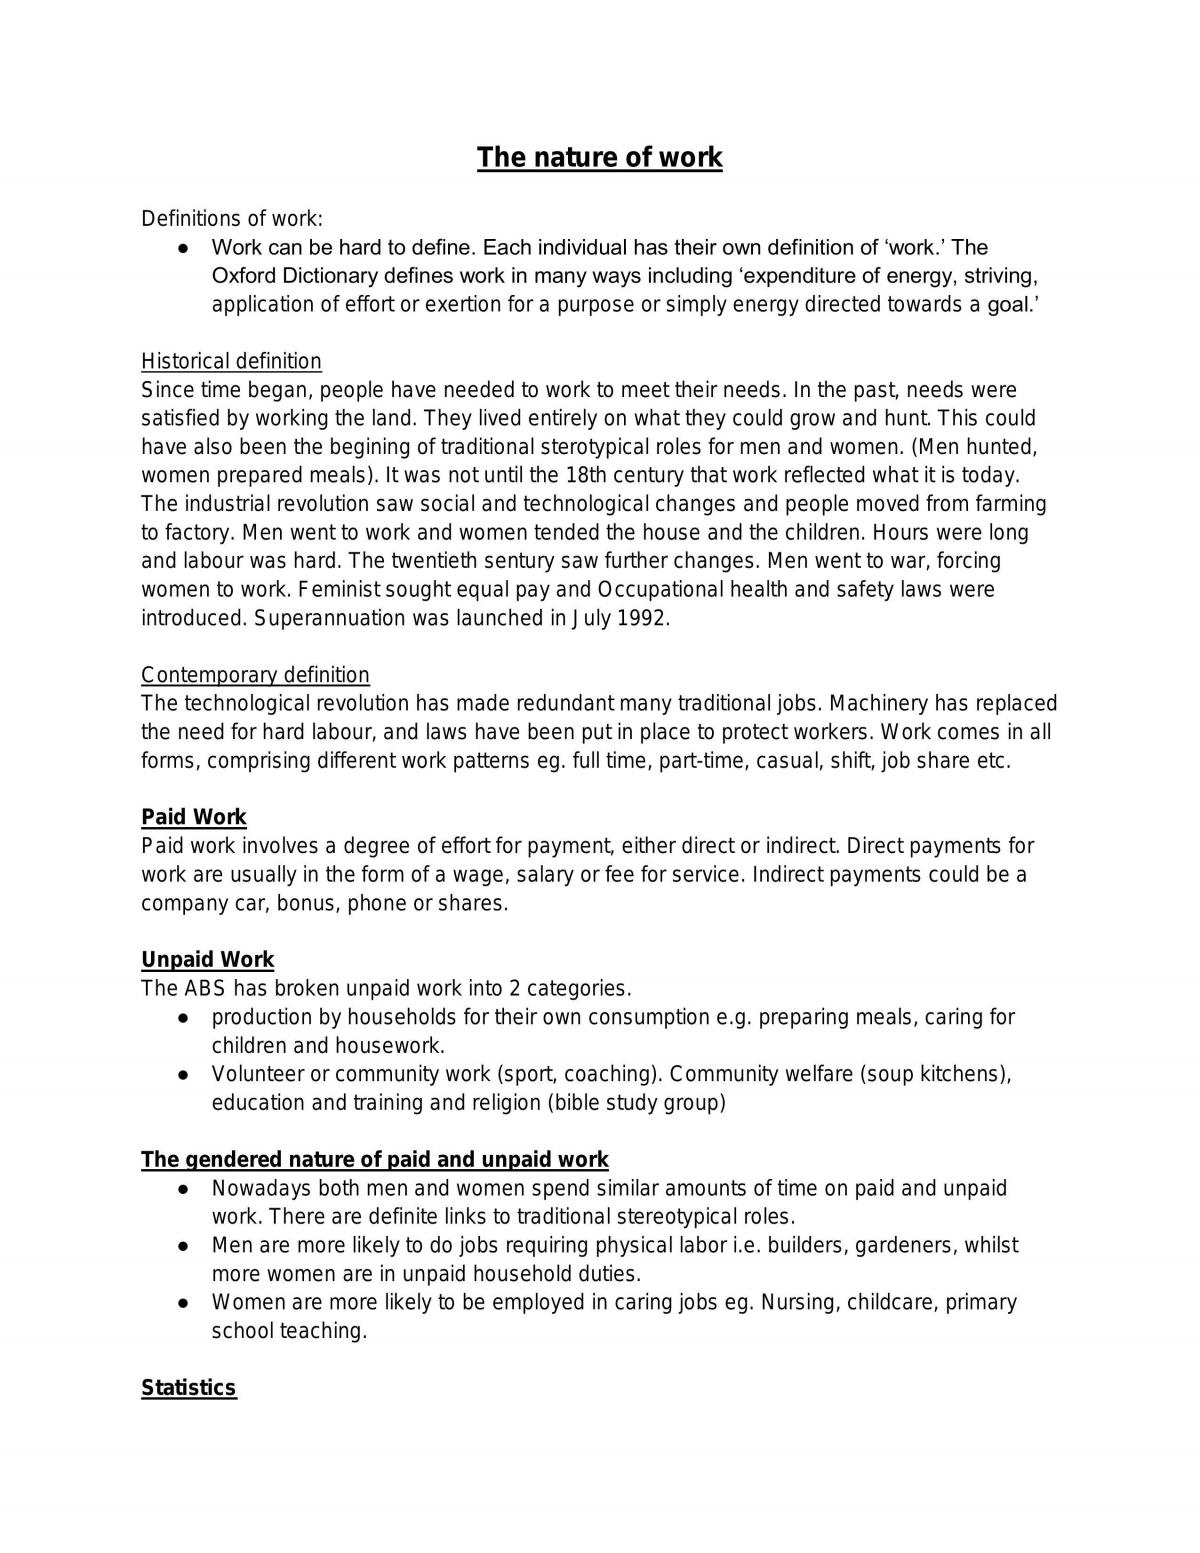 Individuals and Work Study Notes - Community and Family Studies HSC - Page 1